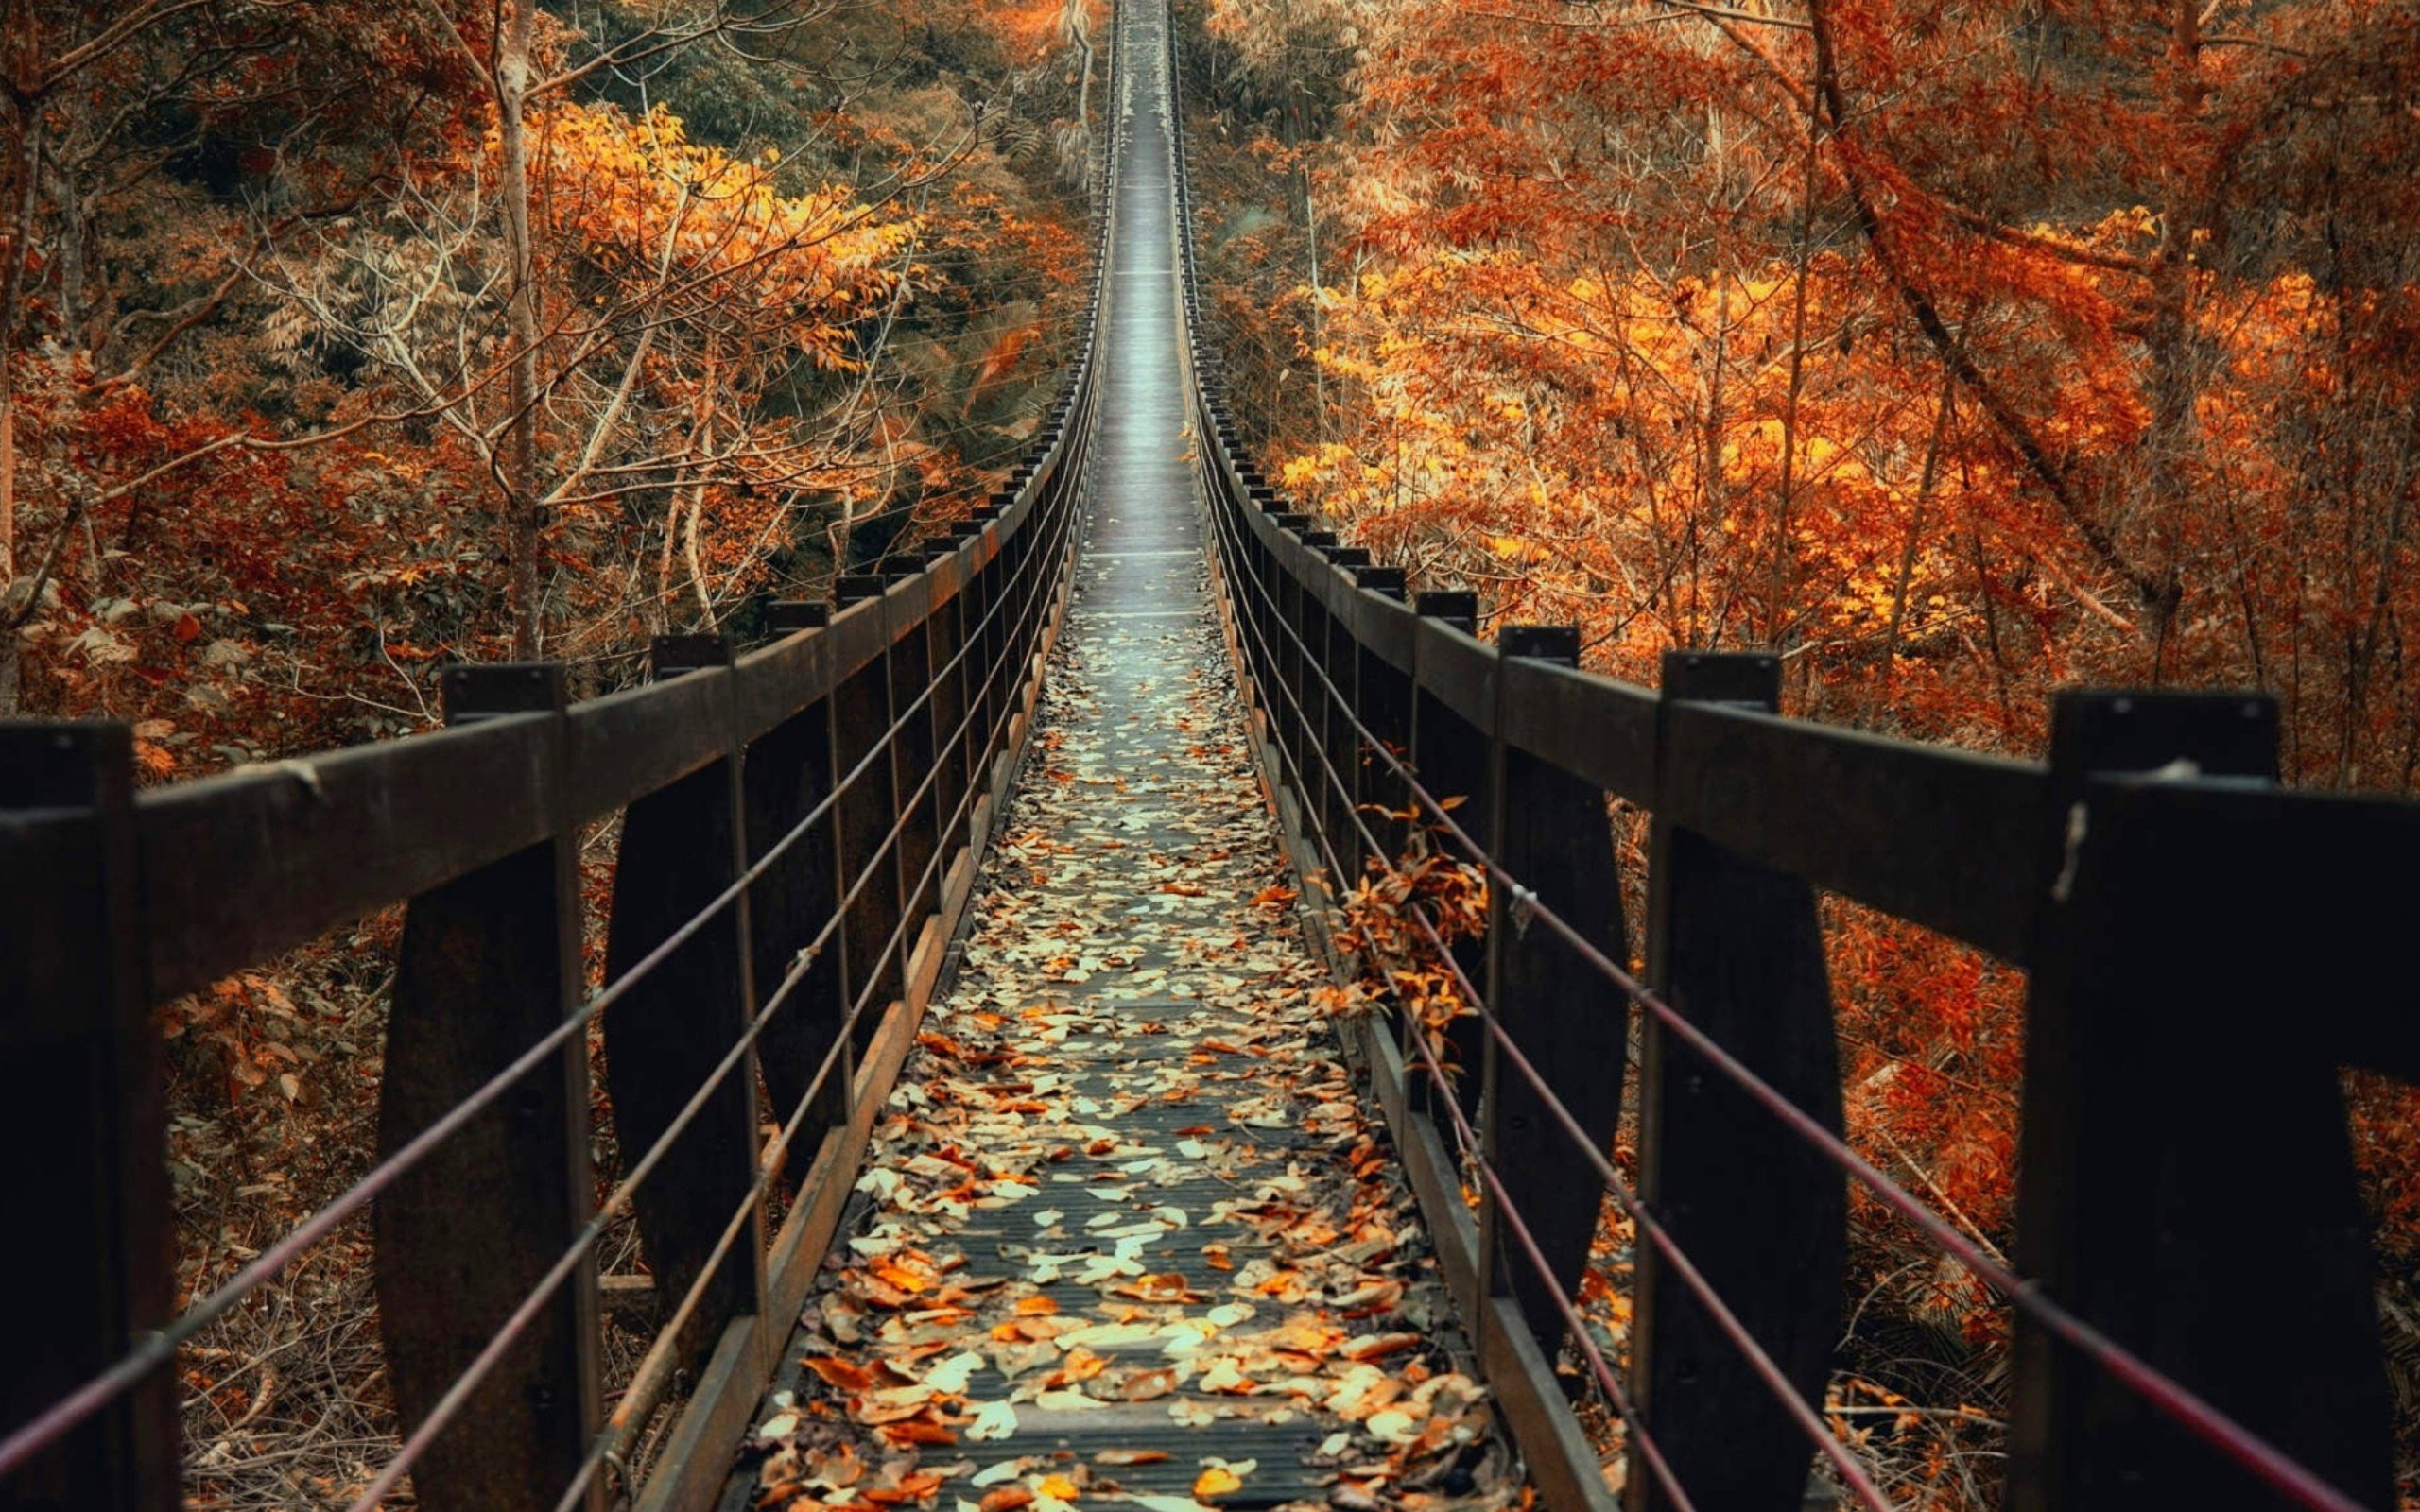 Download 2560x1600 Autumn, Wooden Bridge, Fall, Leaves, Path Wallpapers for MacBook Pro 13 inch